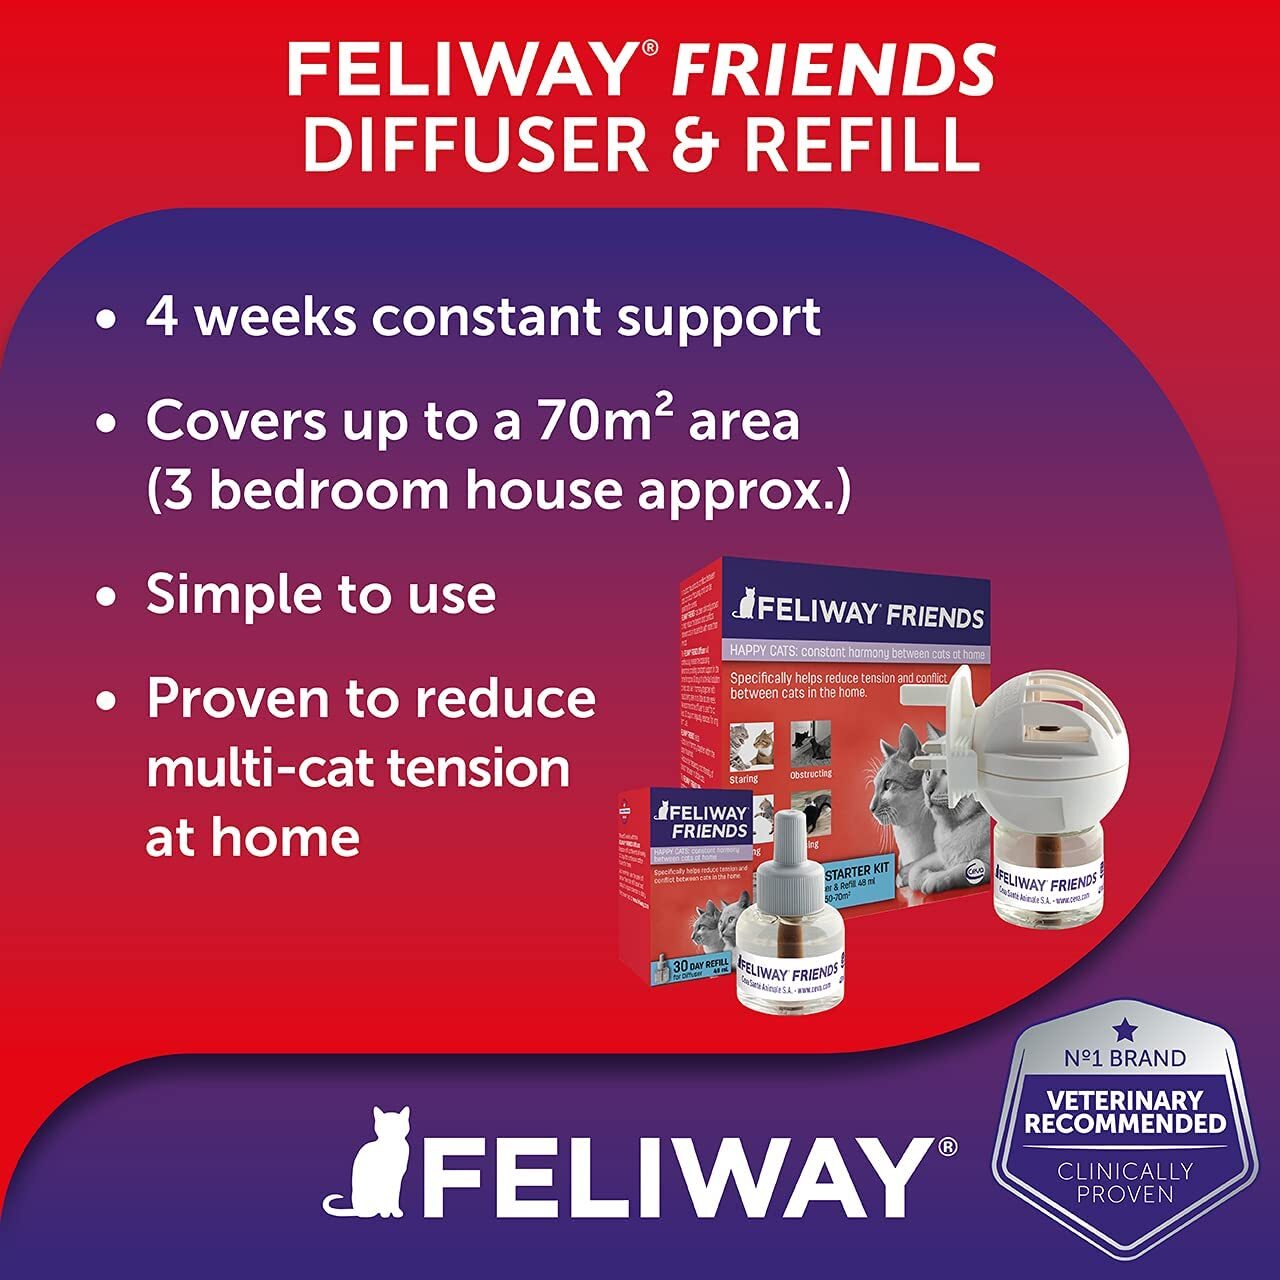 Feliway® Friends  Cat grooming & care products at zooplus